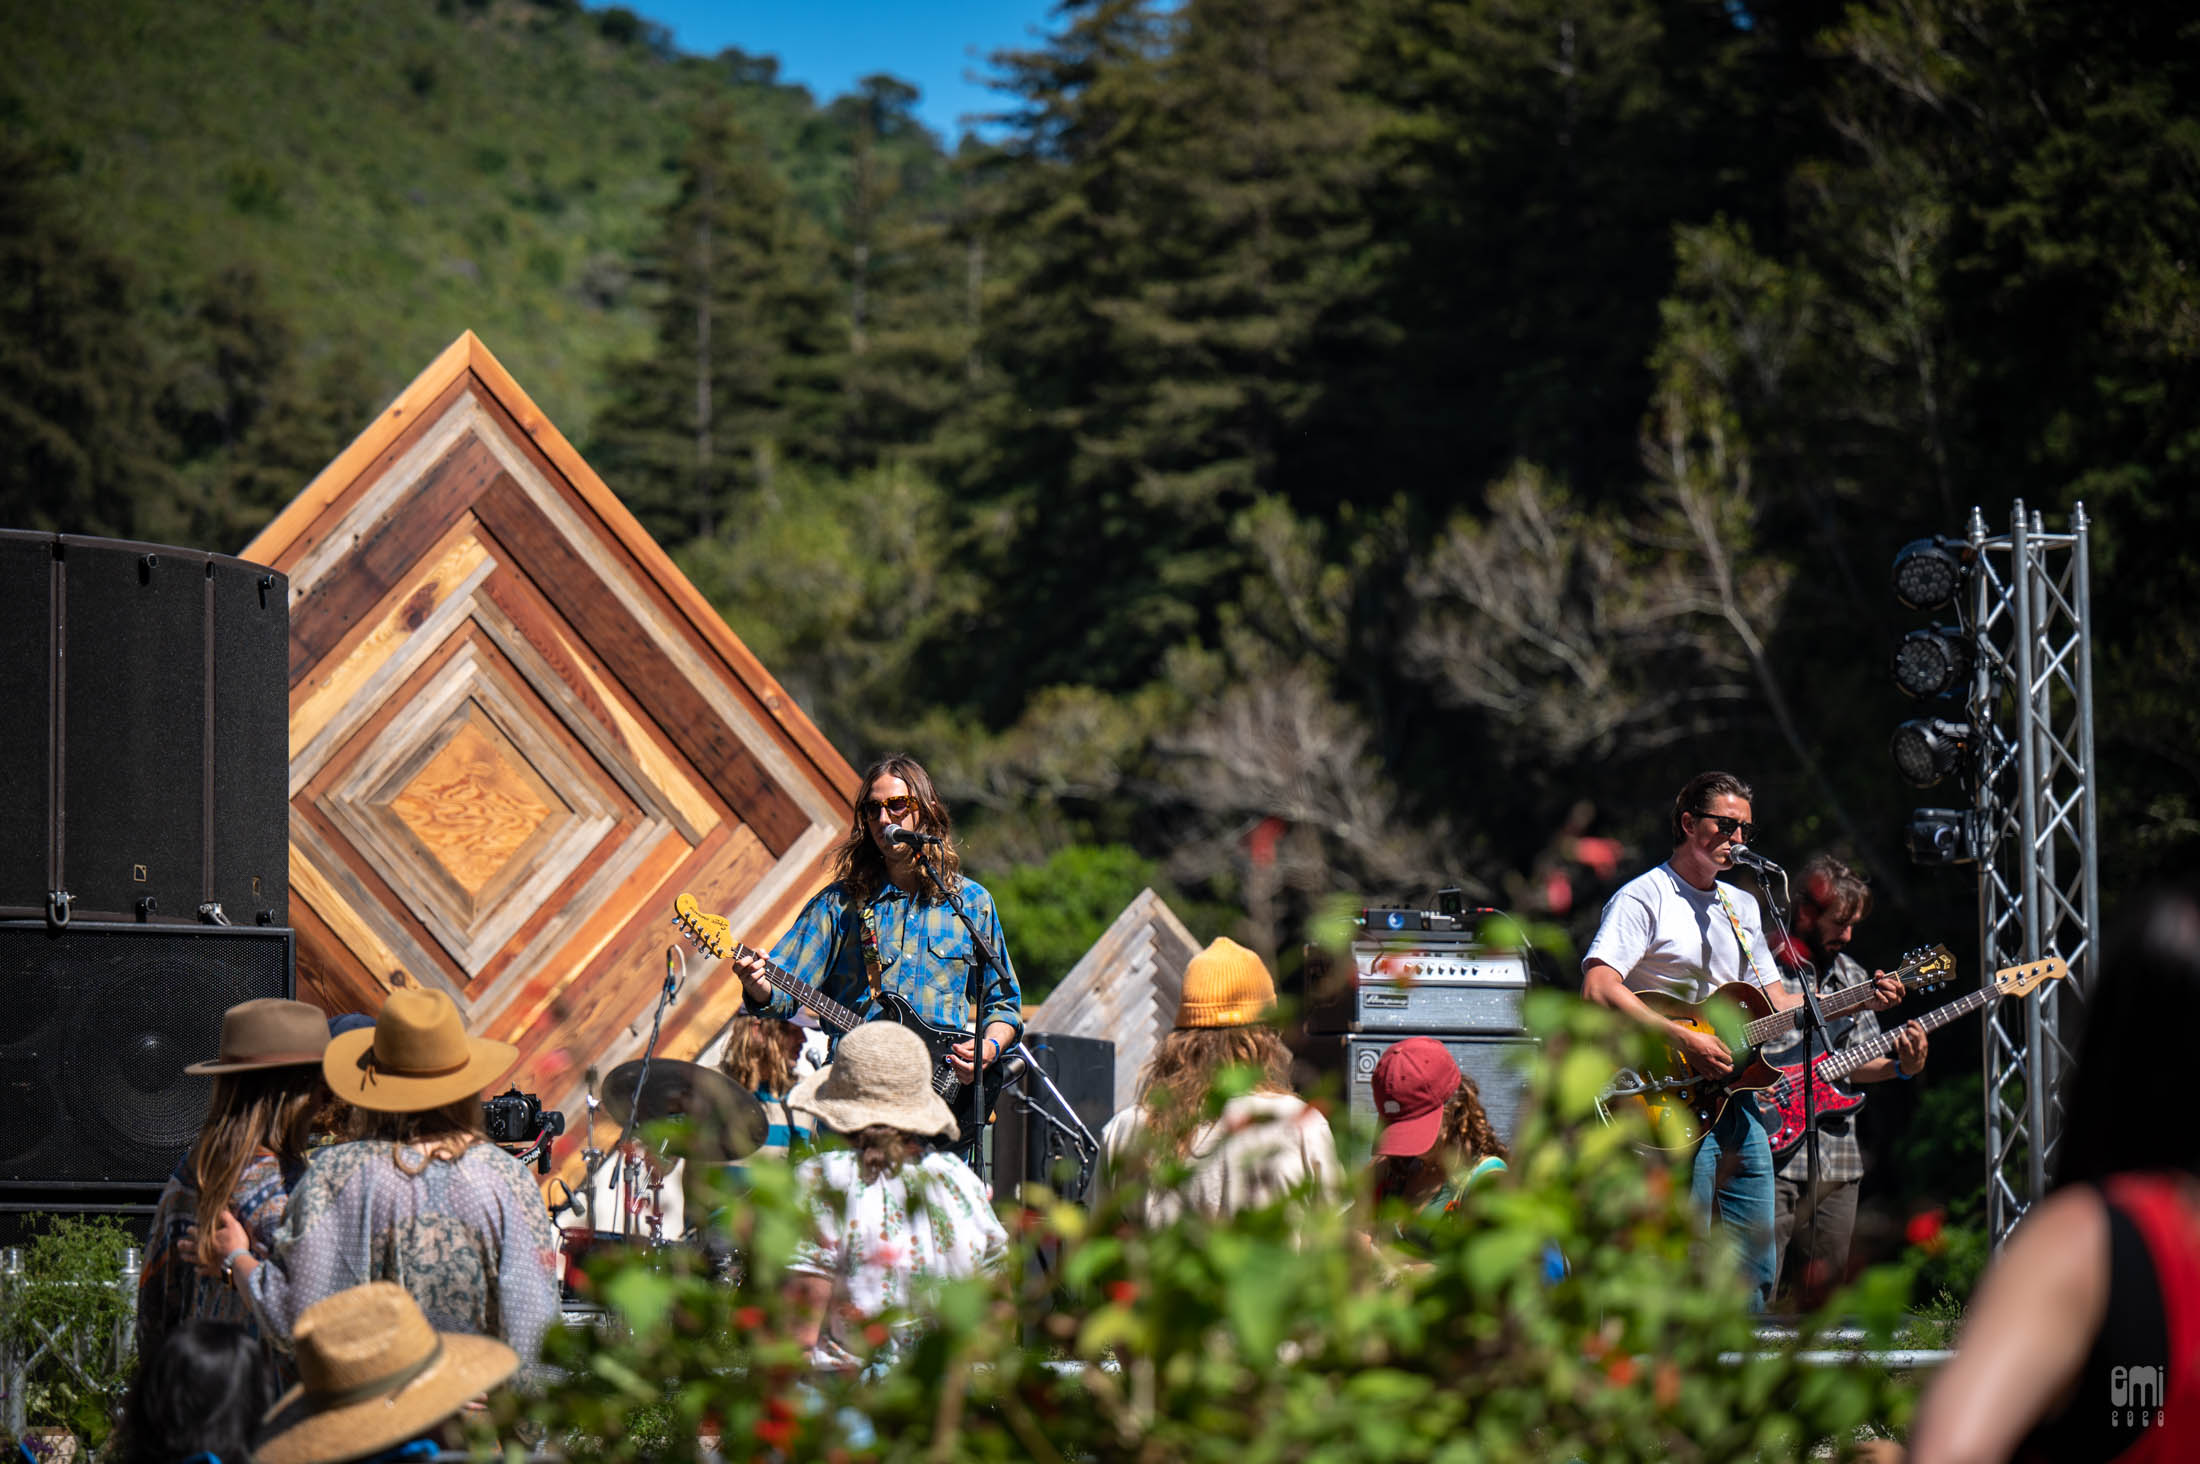 2023.5.20 HIPNIC XIV - MAPACHE at Fernwood, Campground and Resort Big Sur CA. photo by emi